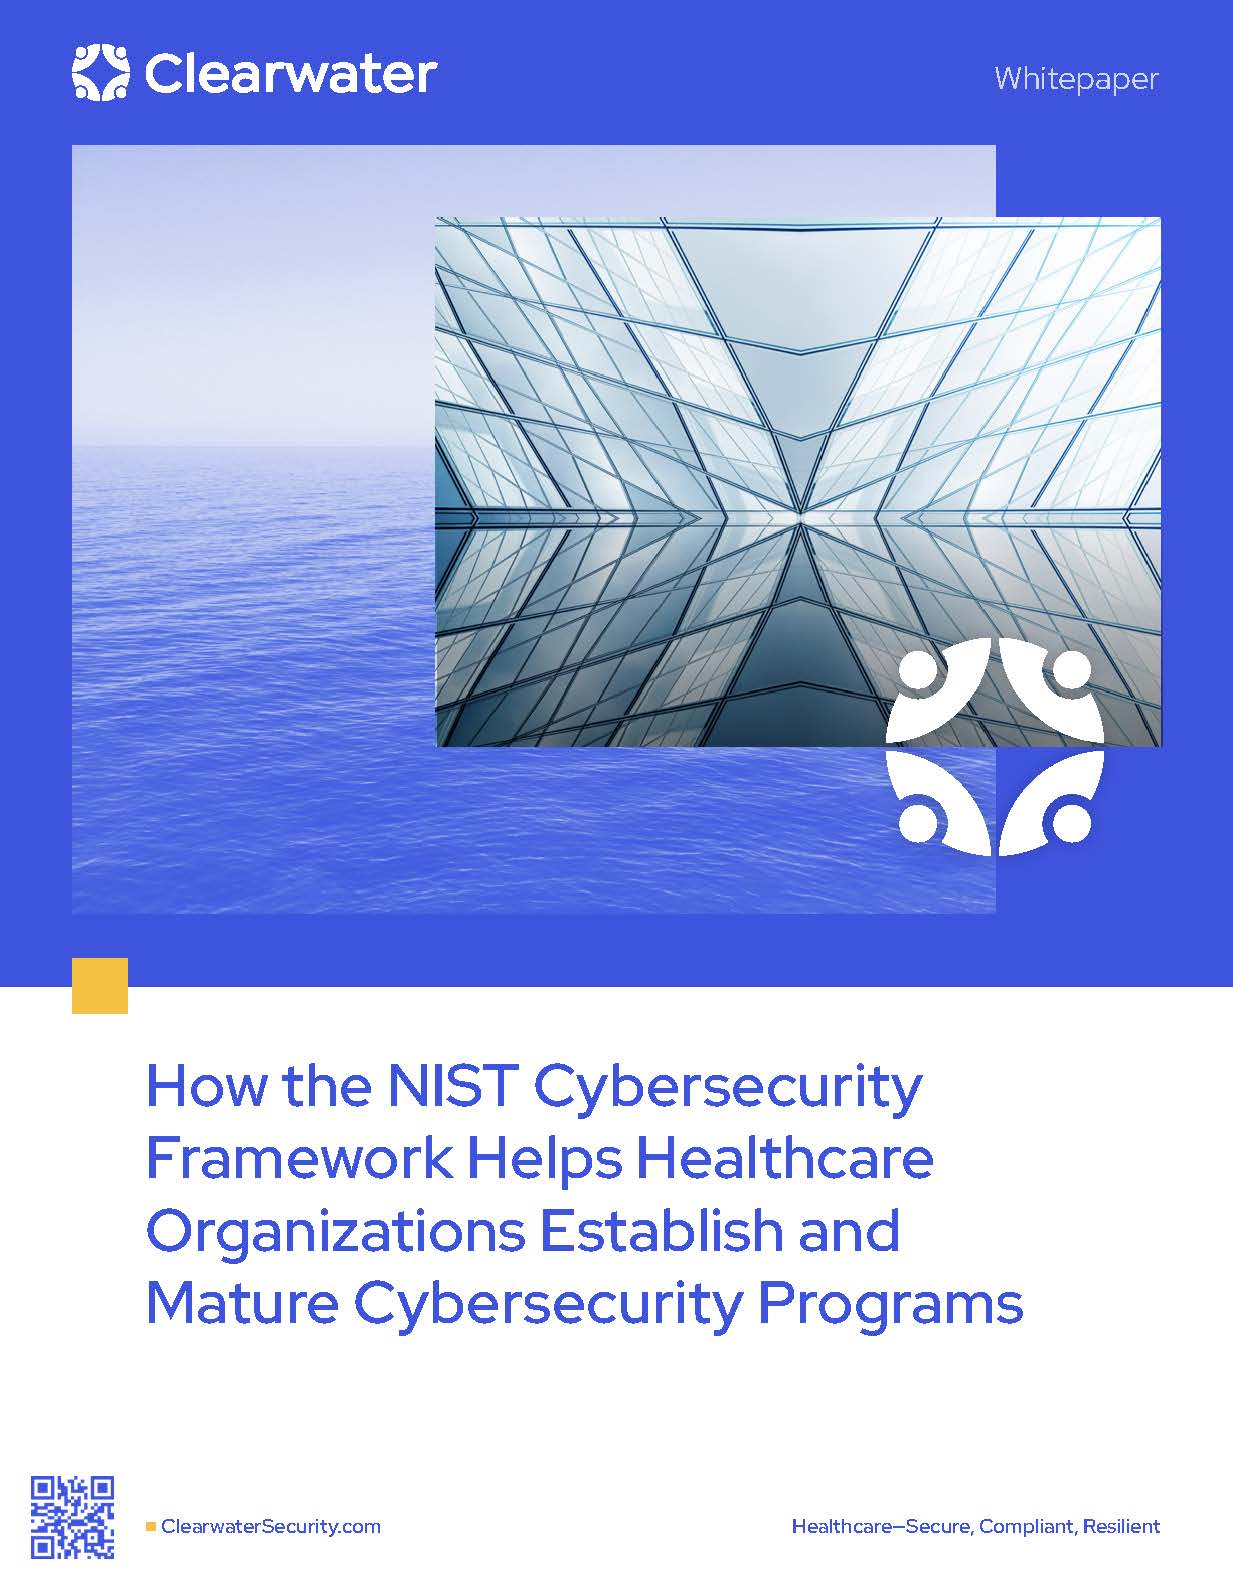 ow the NIST Cybersecurity Framework Helps Healthcare Organizations by Clearwater